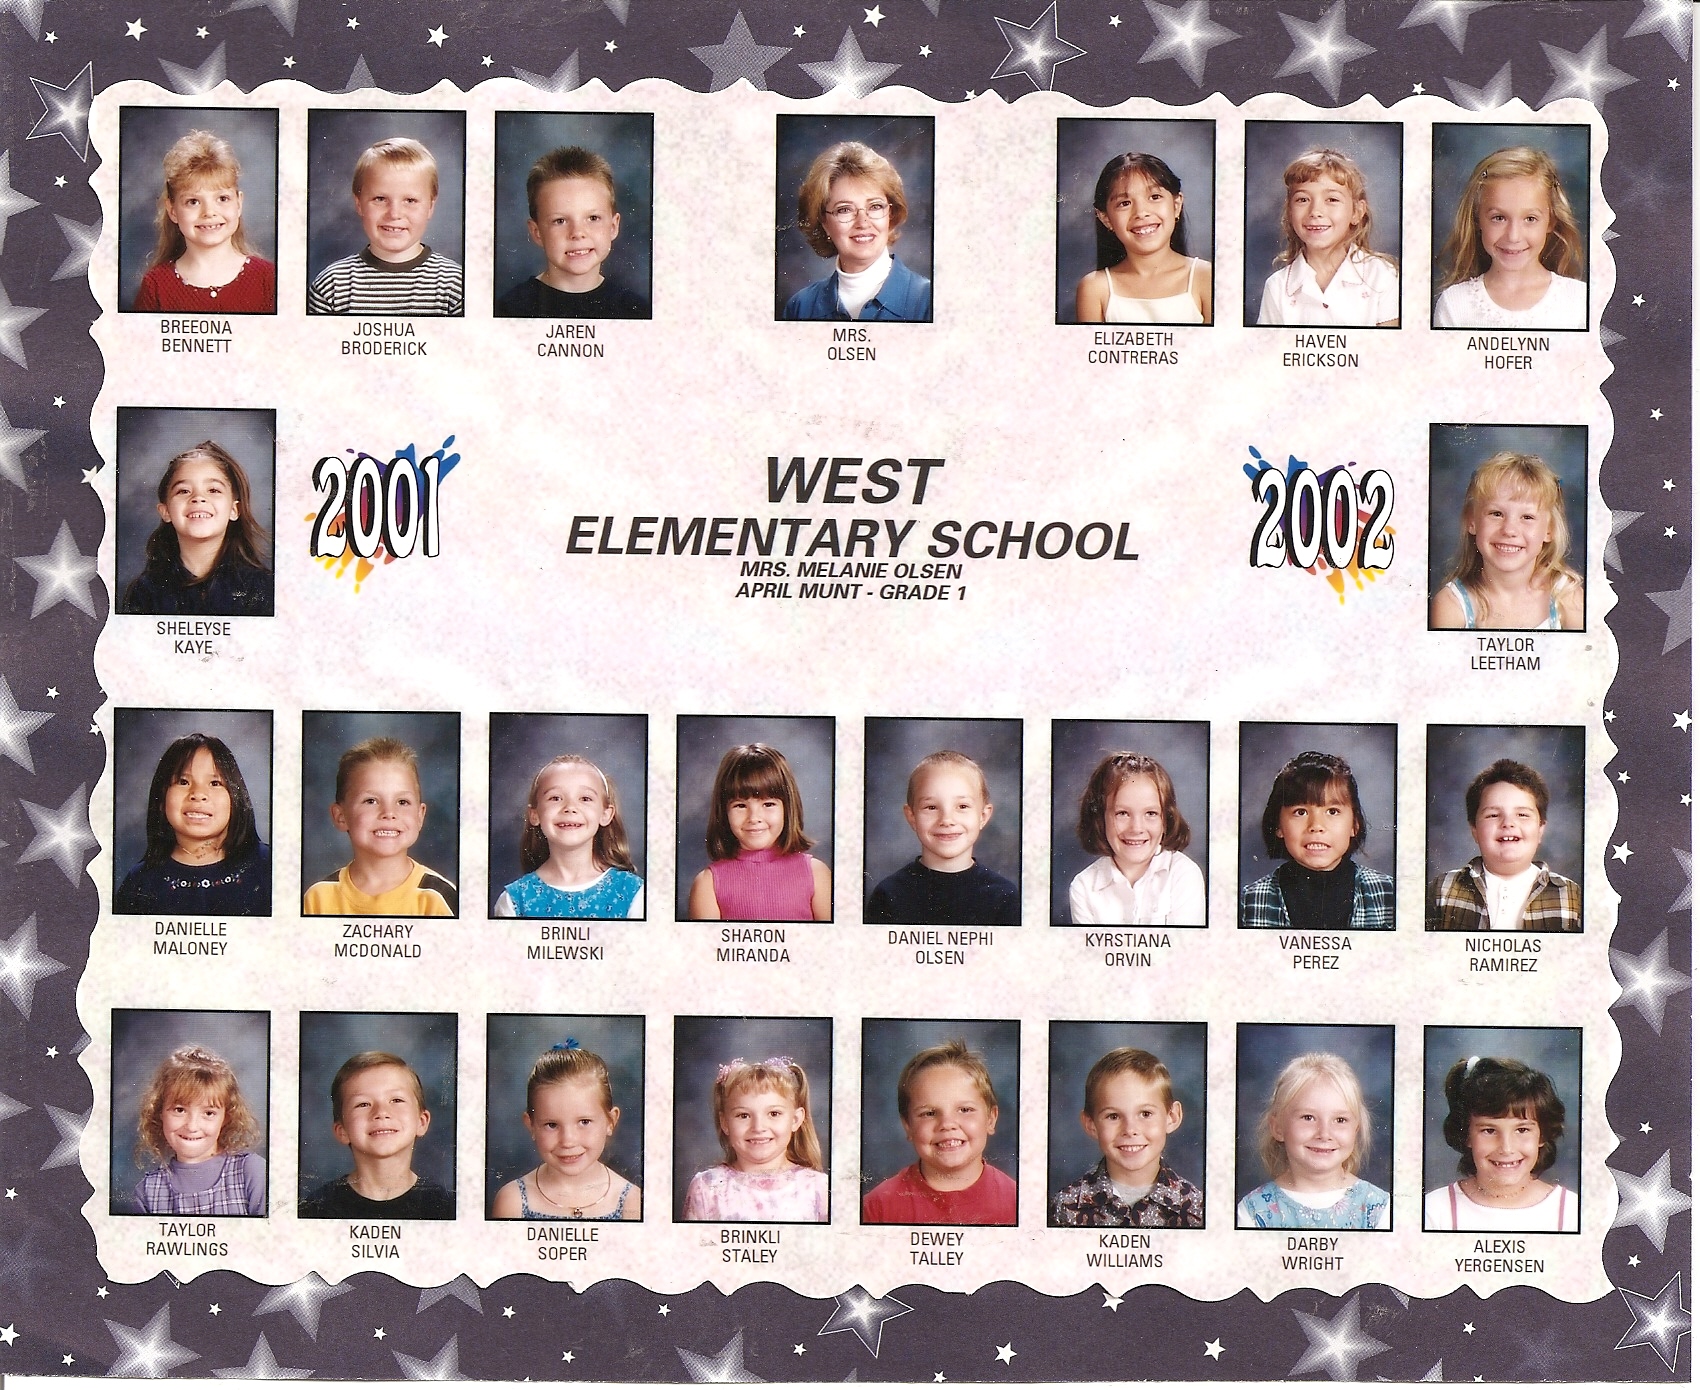 April Munt's 2001-2002 first grade class at West Elementary School